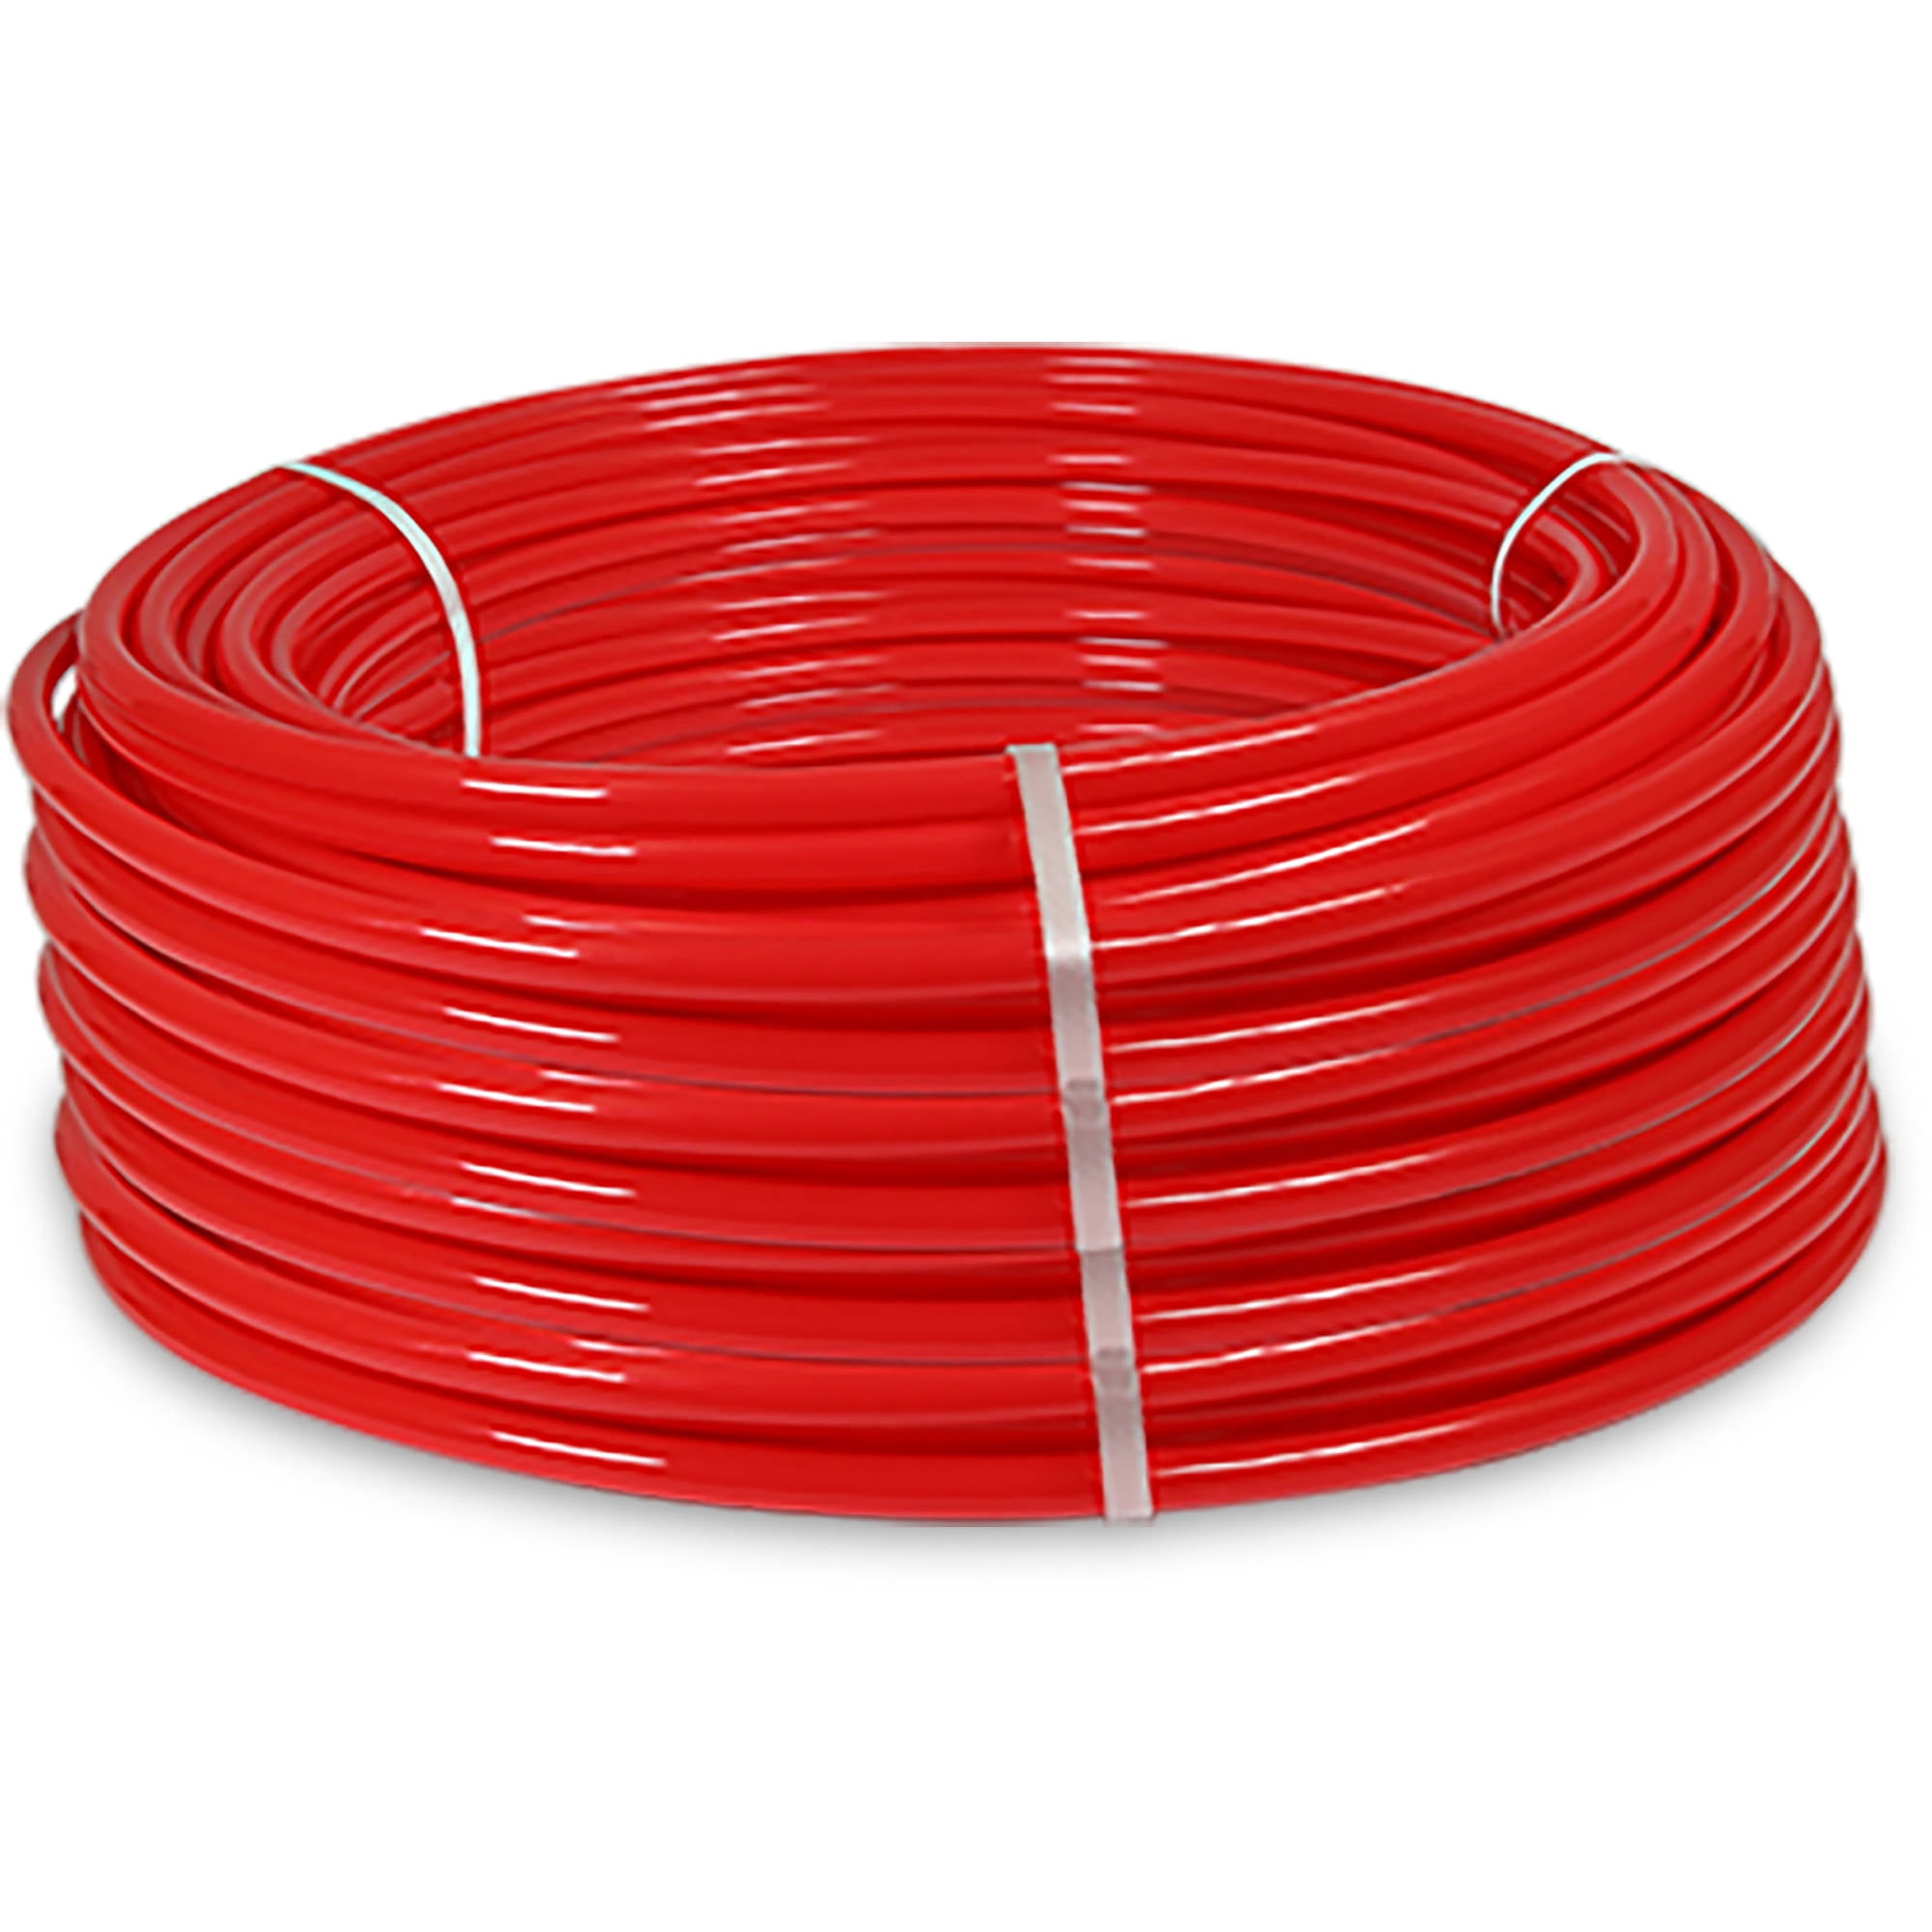 3/4" x 500 ft PEX Tubing for Potable Water FREE SHIPPING 